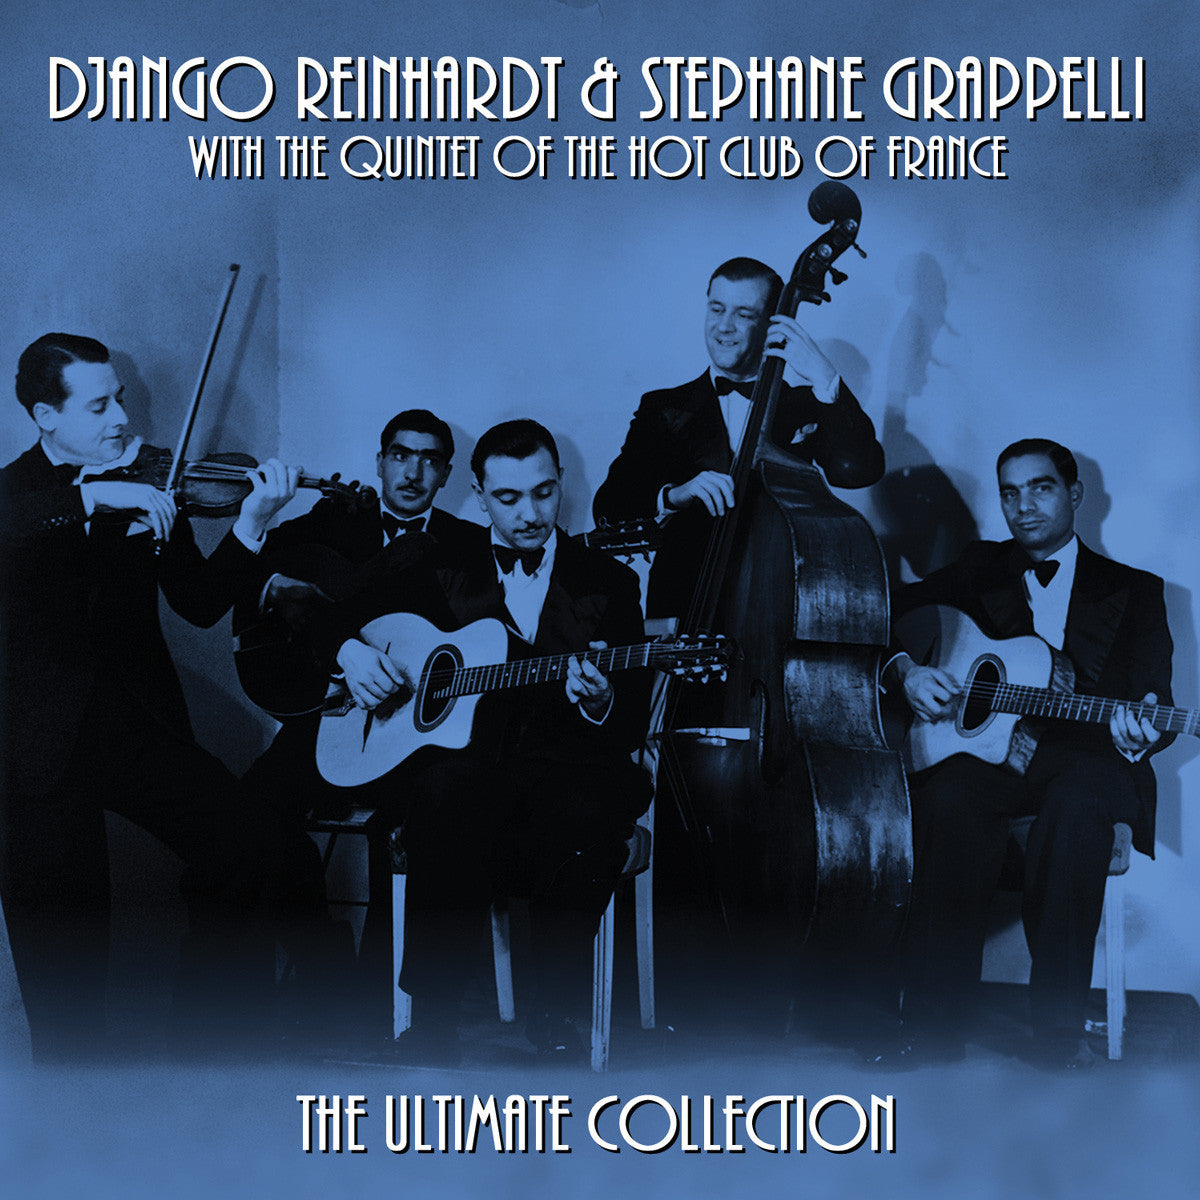 Django Reinhardt & Stephane Grappelli The Ultimate Collection 2 x CD SET (NOT NOW)